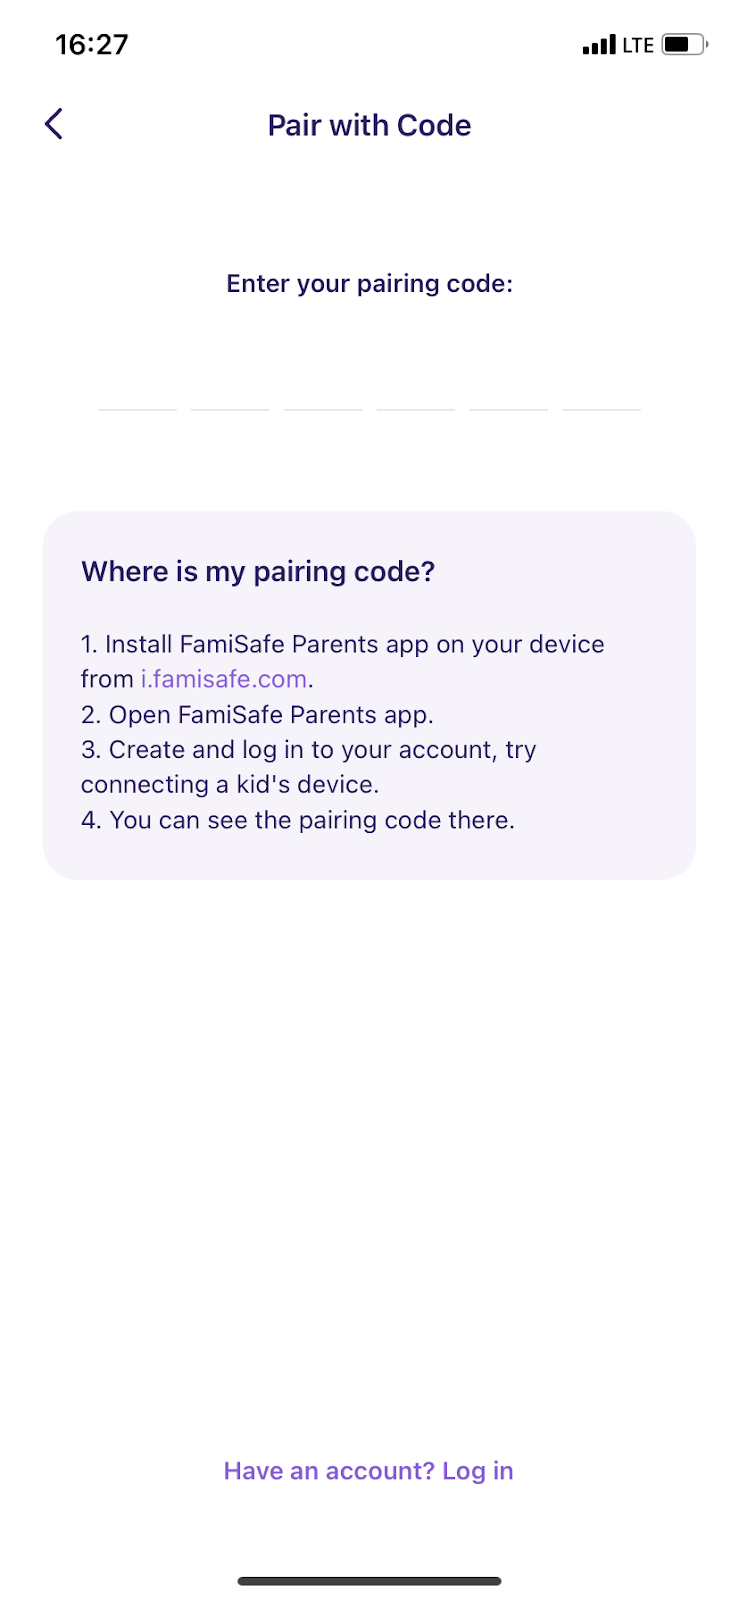 how to paid kids and parents device together